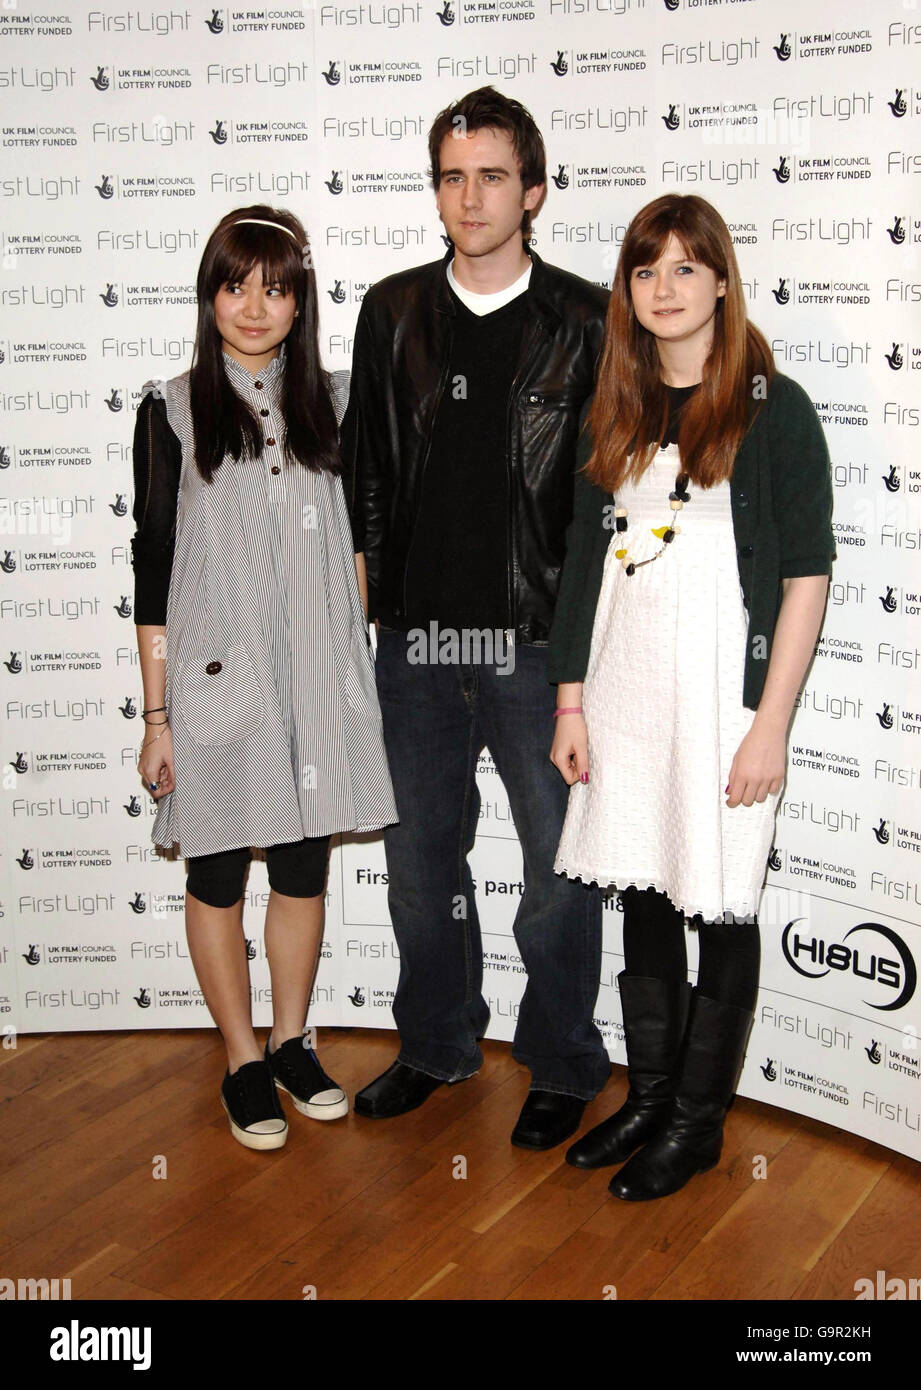 (Left-right) Katie Leung, Matthew Lewis & Bonnie Wright arrive for the First Light Film Awards 2007 at the Odeon Cinema in Leicester Square, central London. Stock Photo